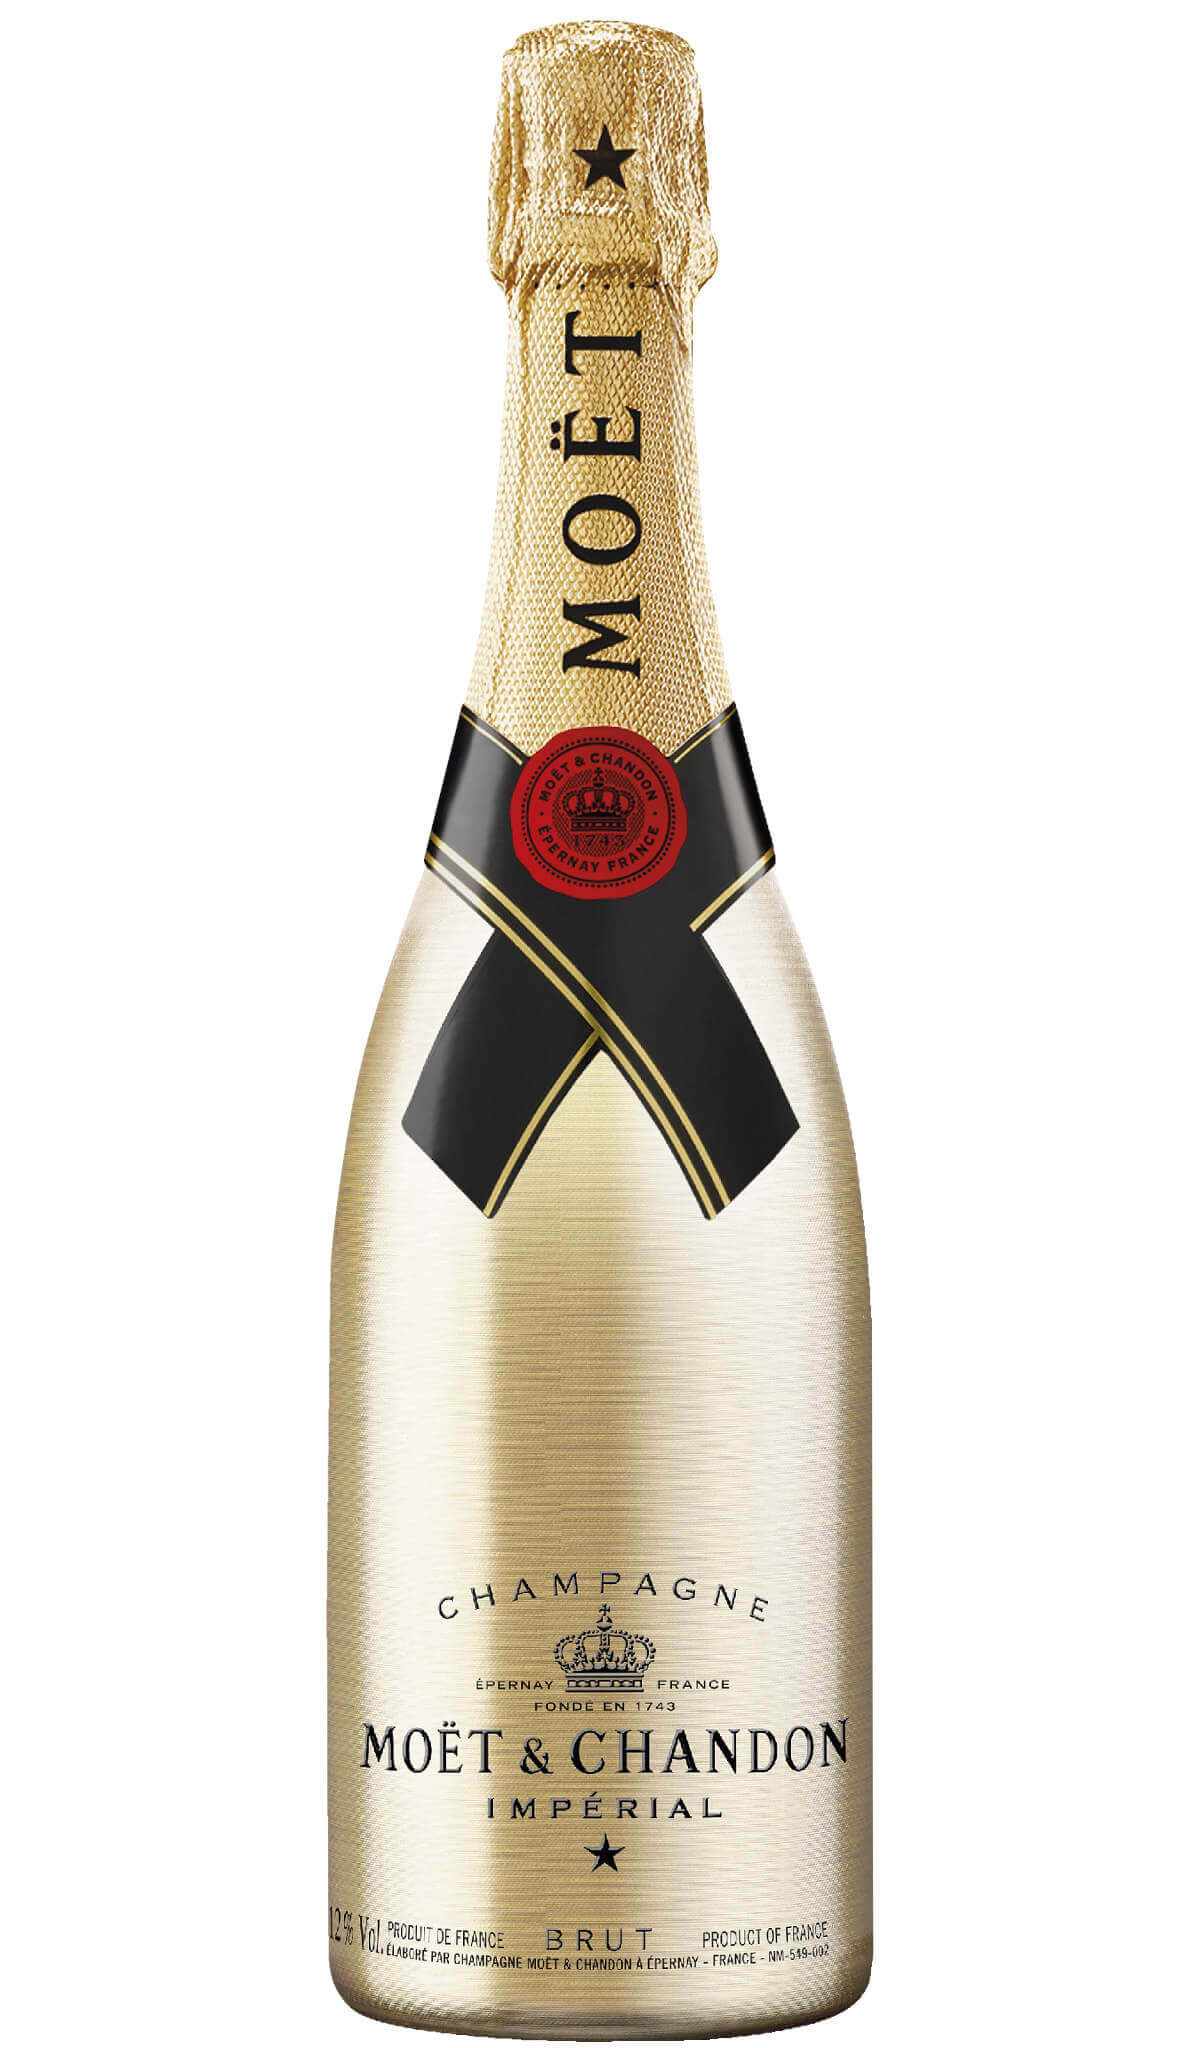 Find out more or buy Moët & Chandon Brut Impérial NV 2022 Gold Sleeve Limited Edition (Champagne) online at Wine Sellers Direct - Australia’s independent liquor specialists.